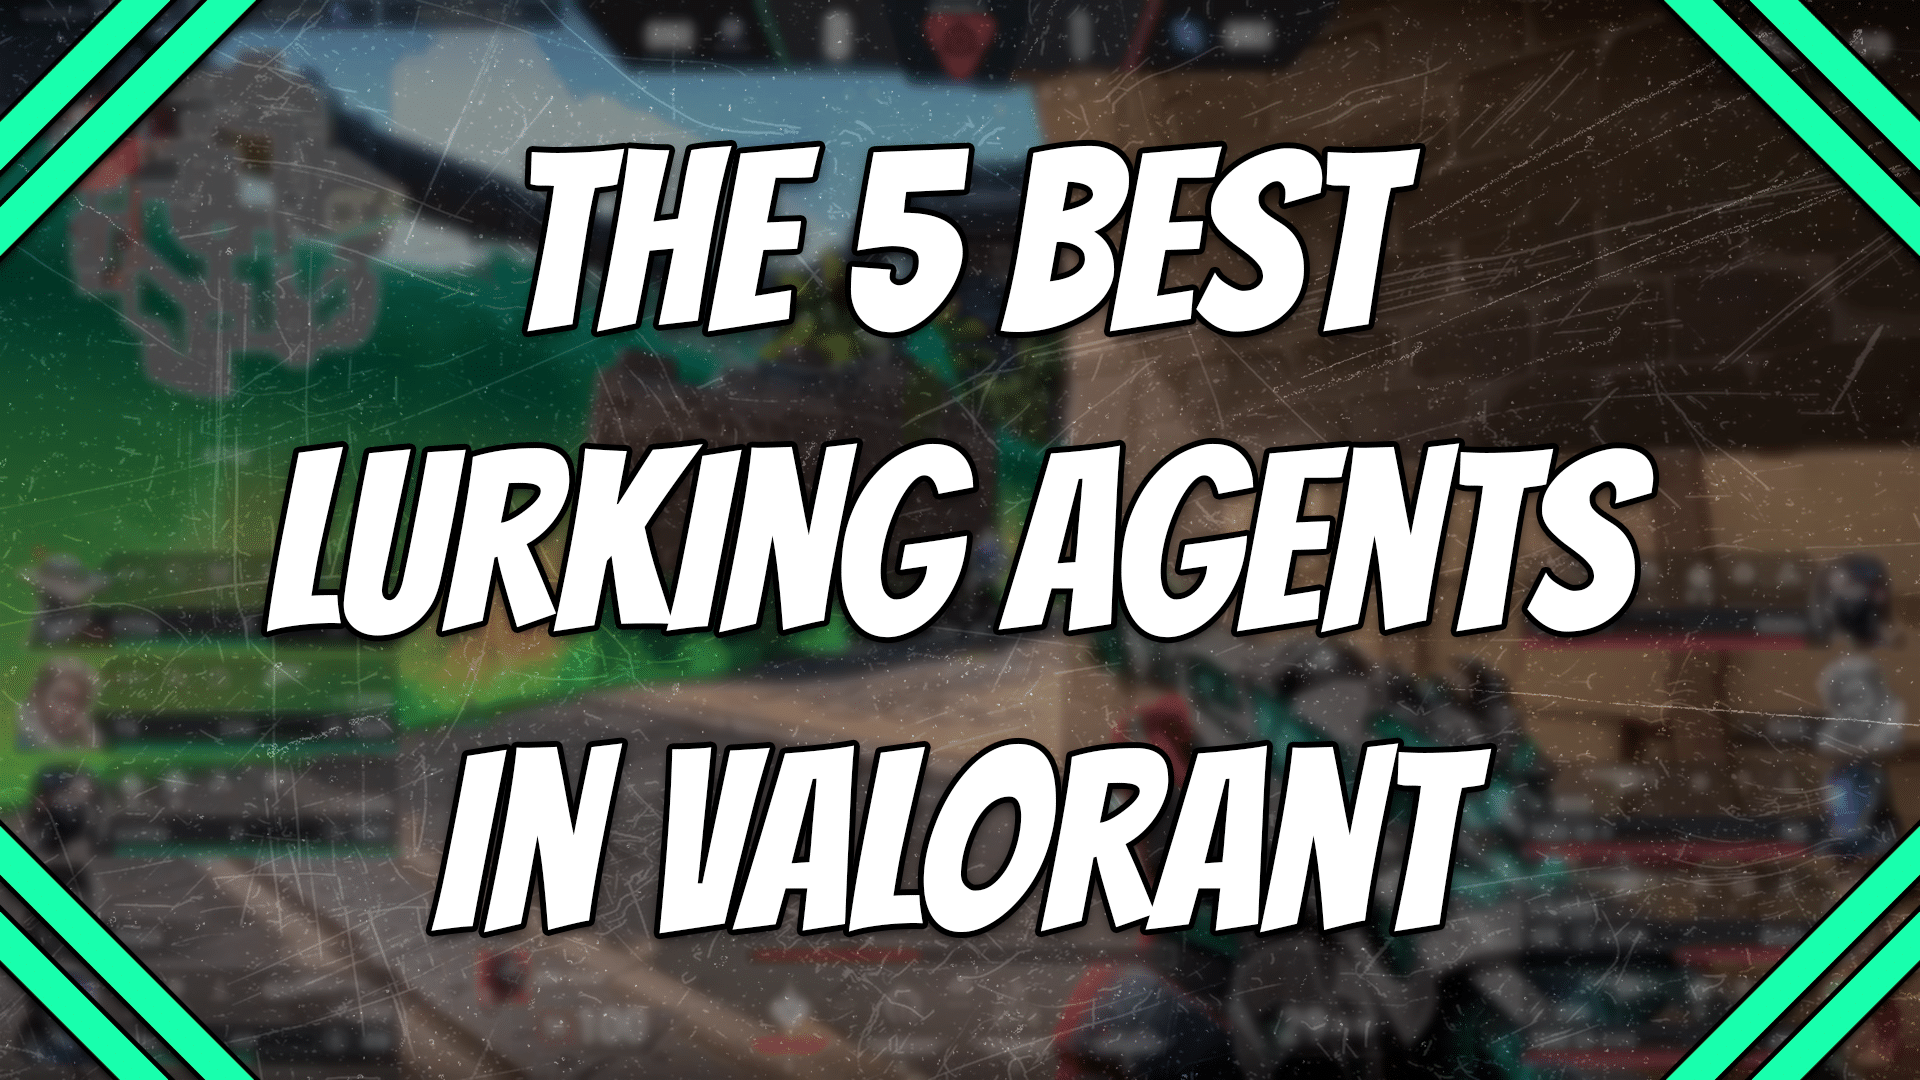 the 5 best lurking agents in Valorant title card